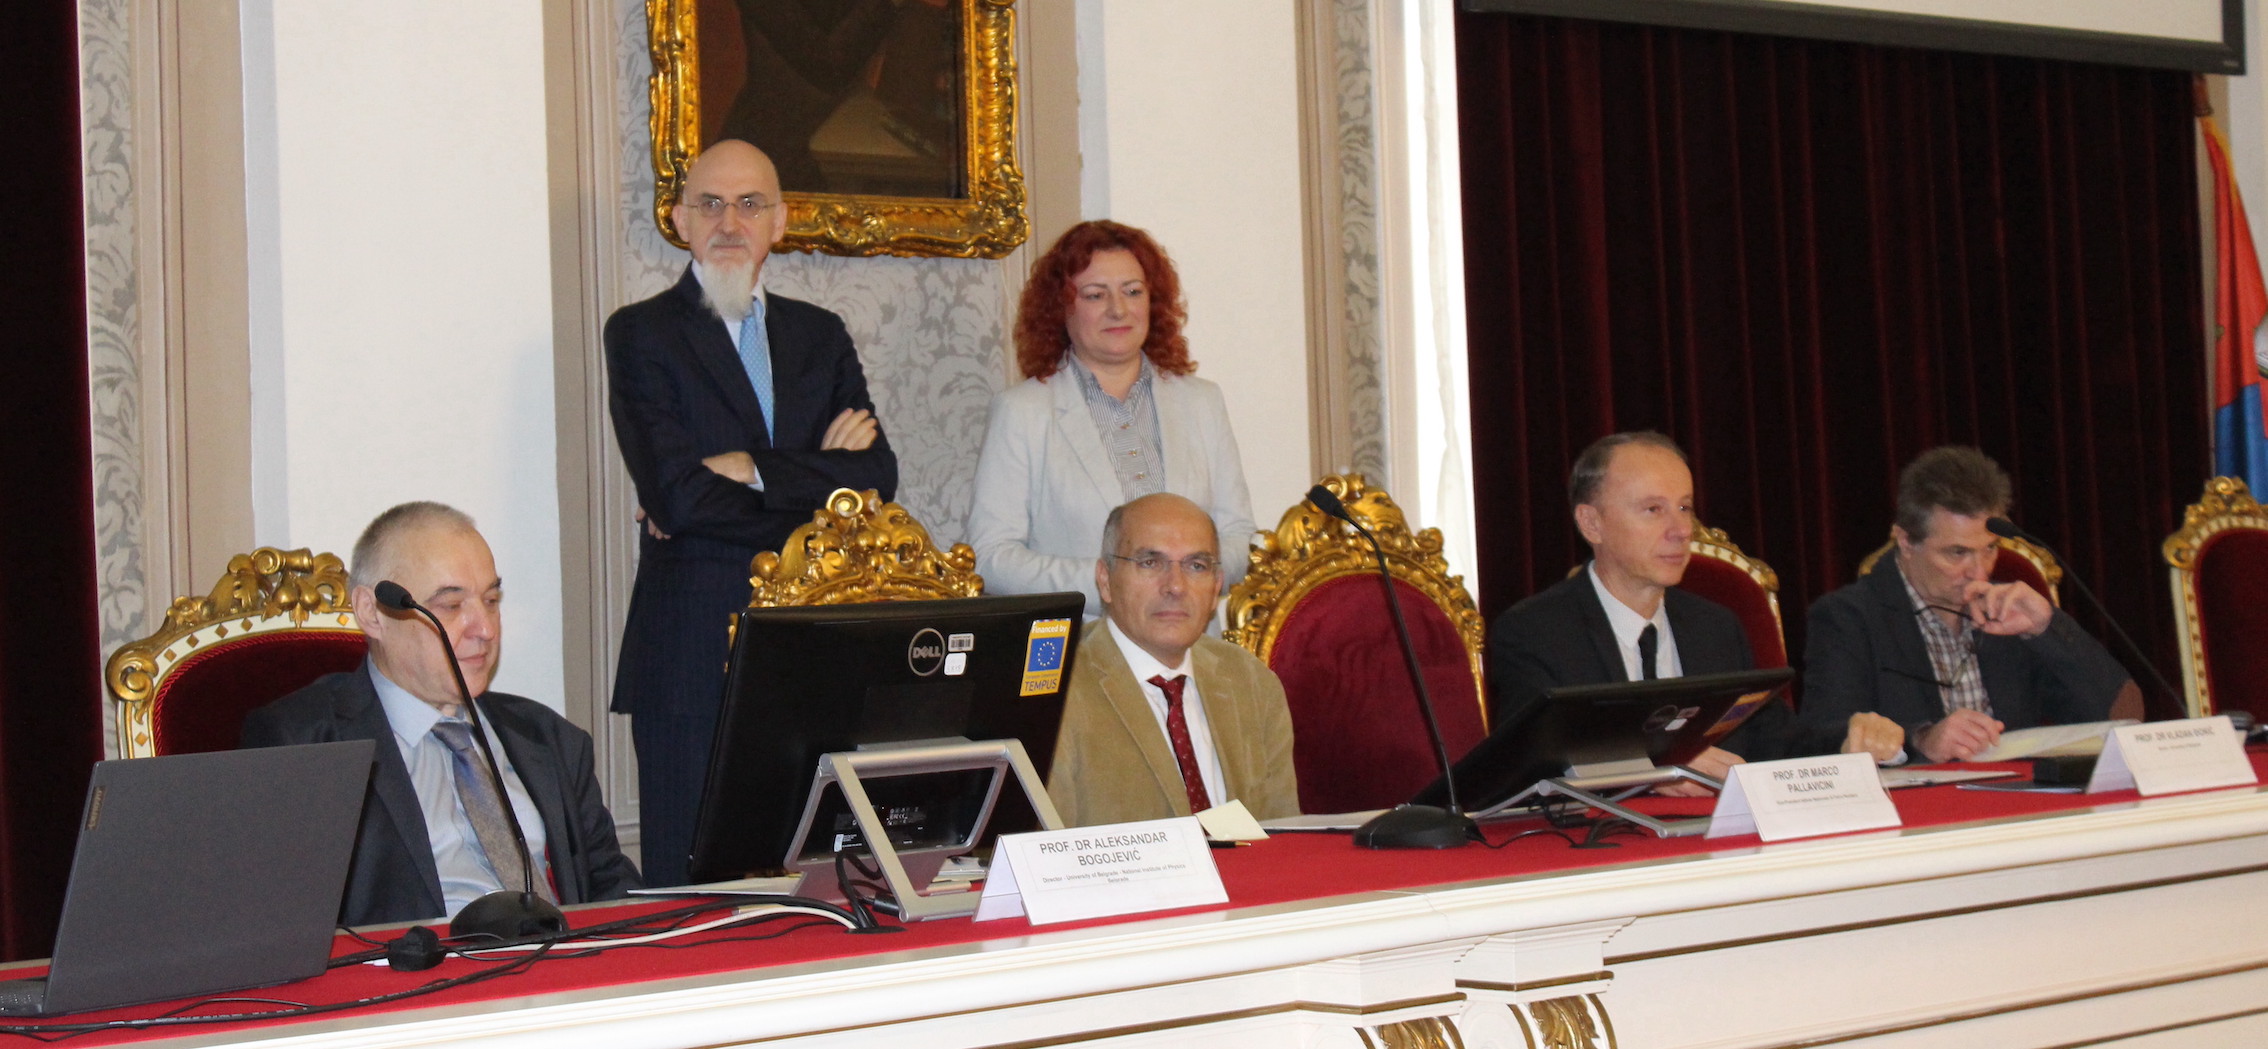 AGREEMENT BETWEEN ITALY AND SERBIA FOR SCIENTIFIC COOPERATION